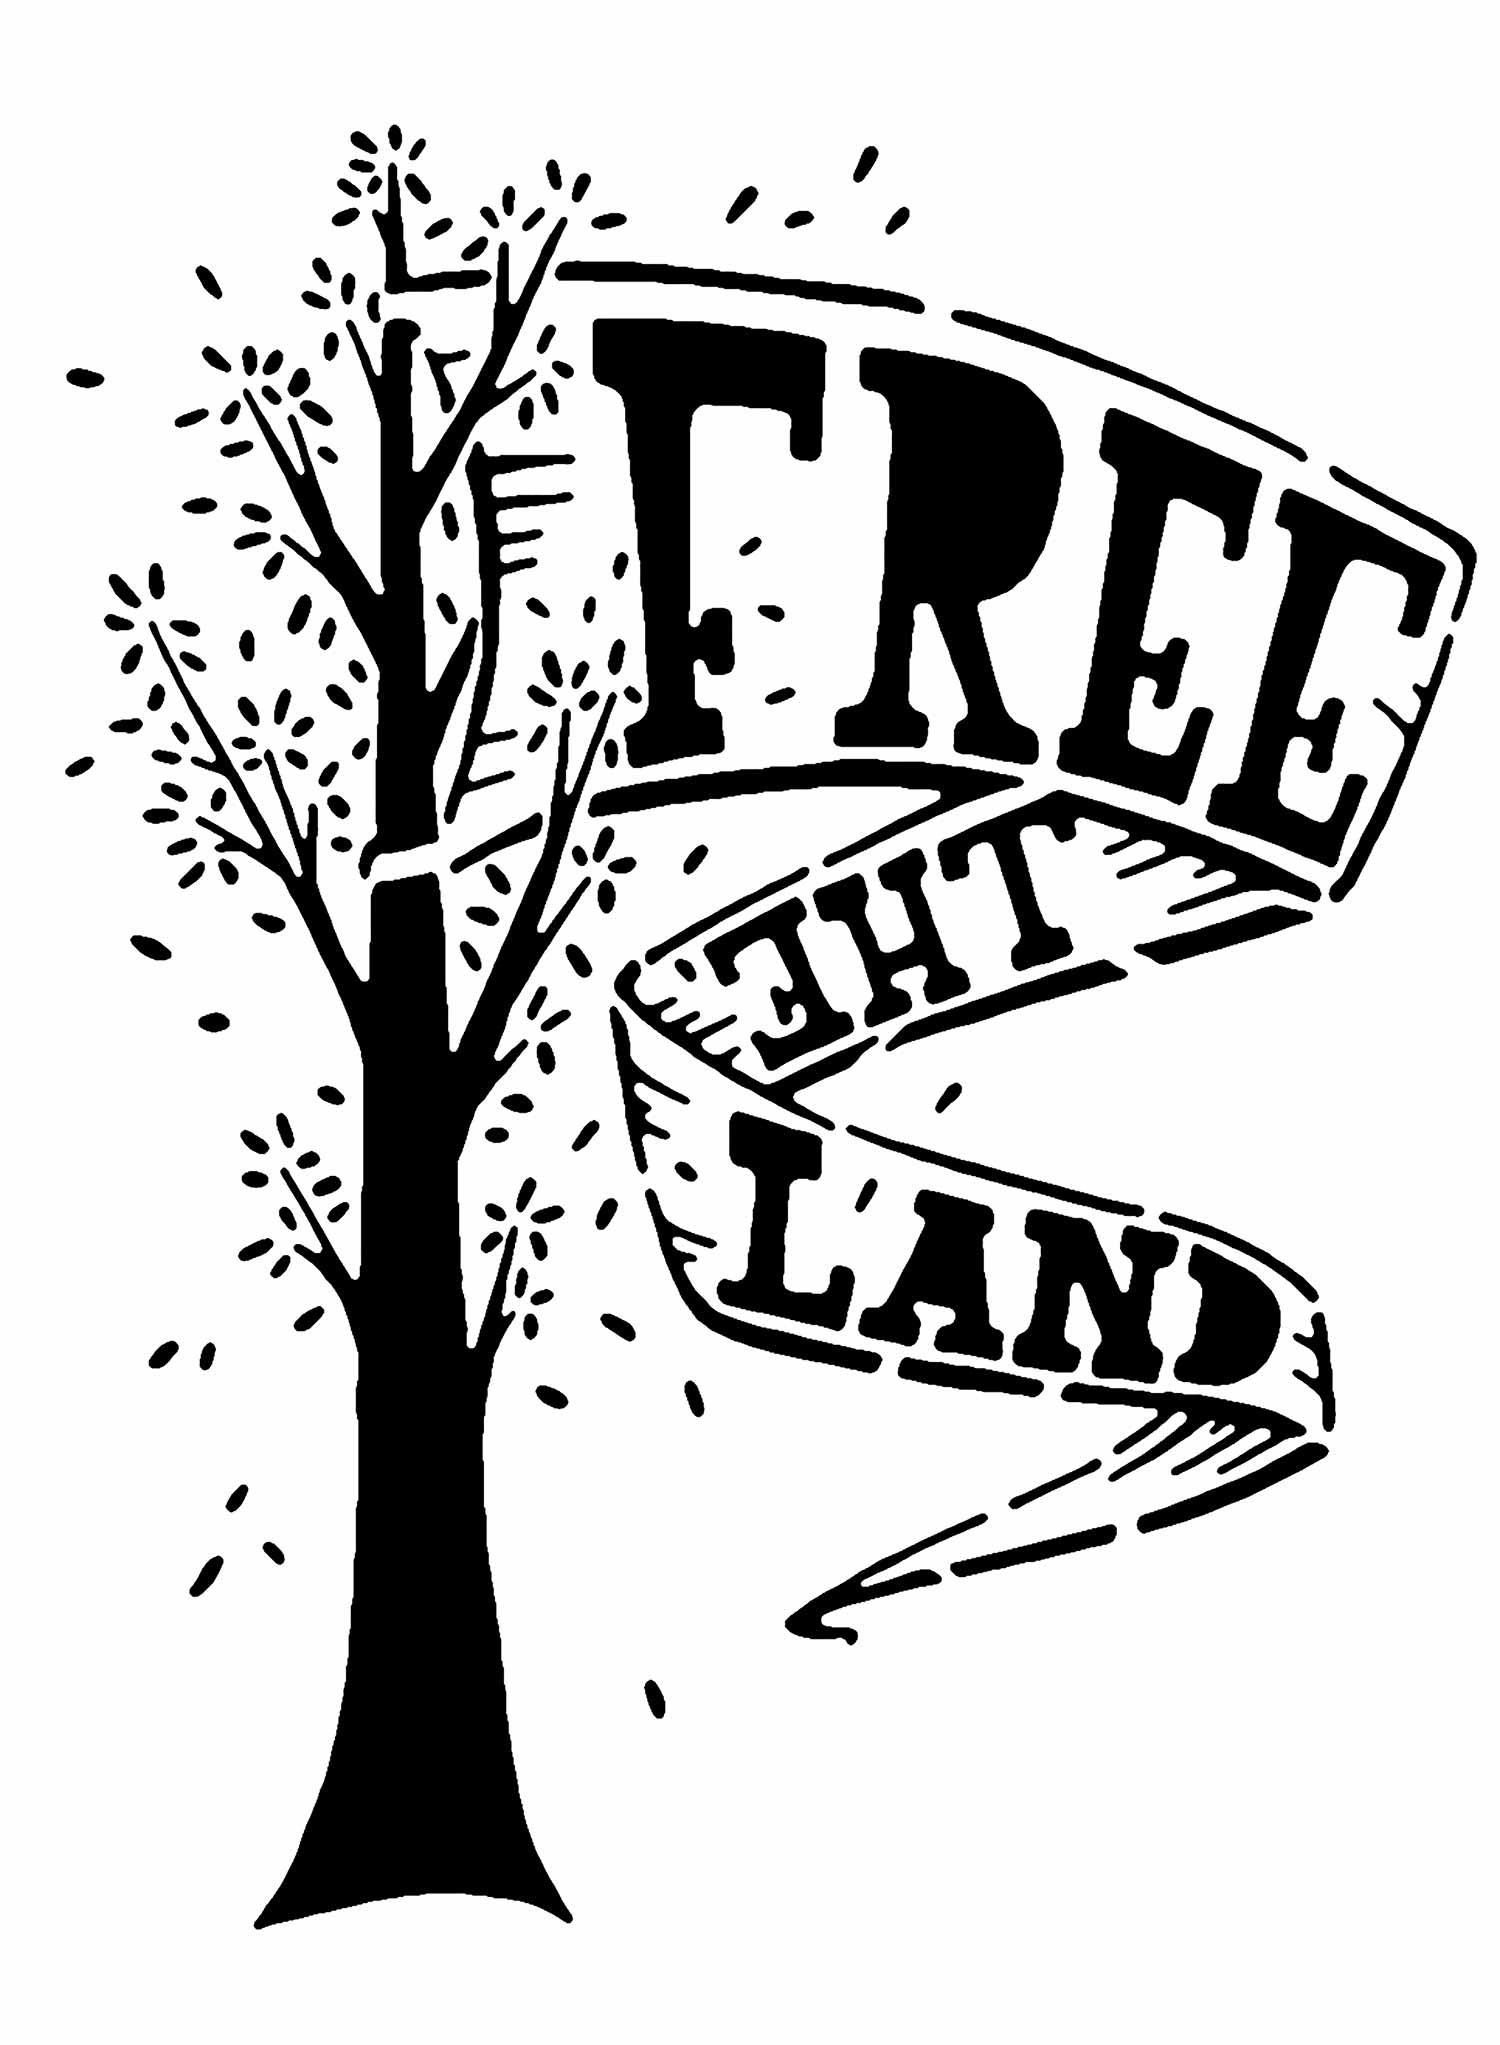 Justseeds | Free the Land